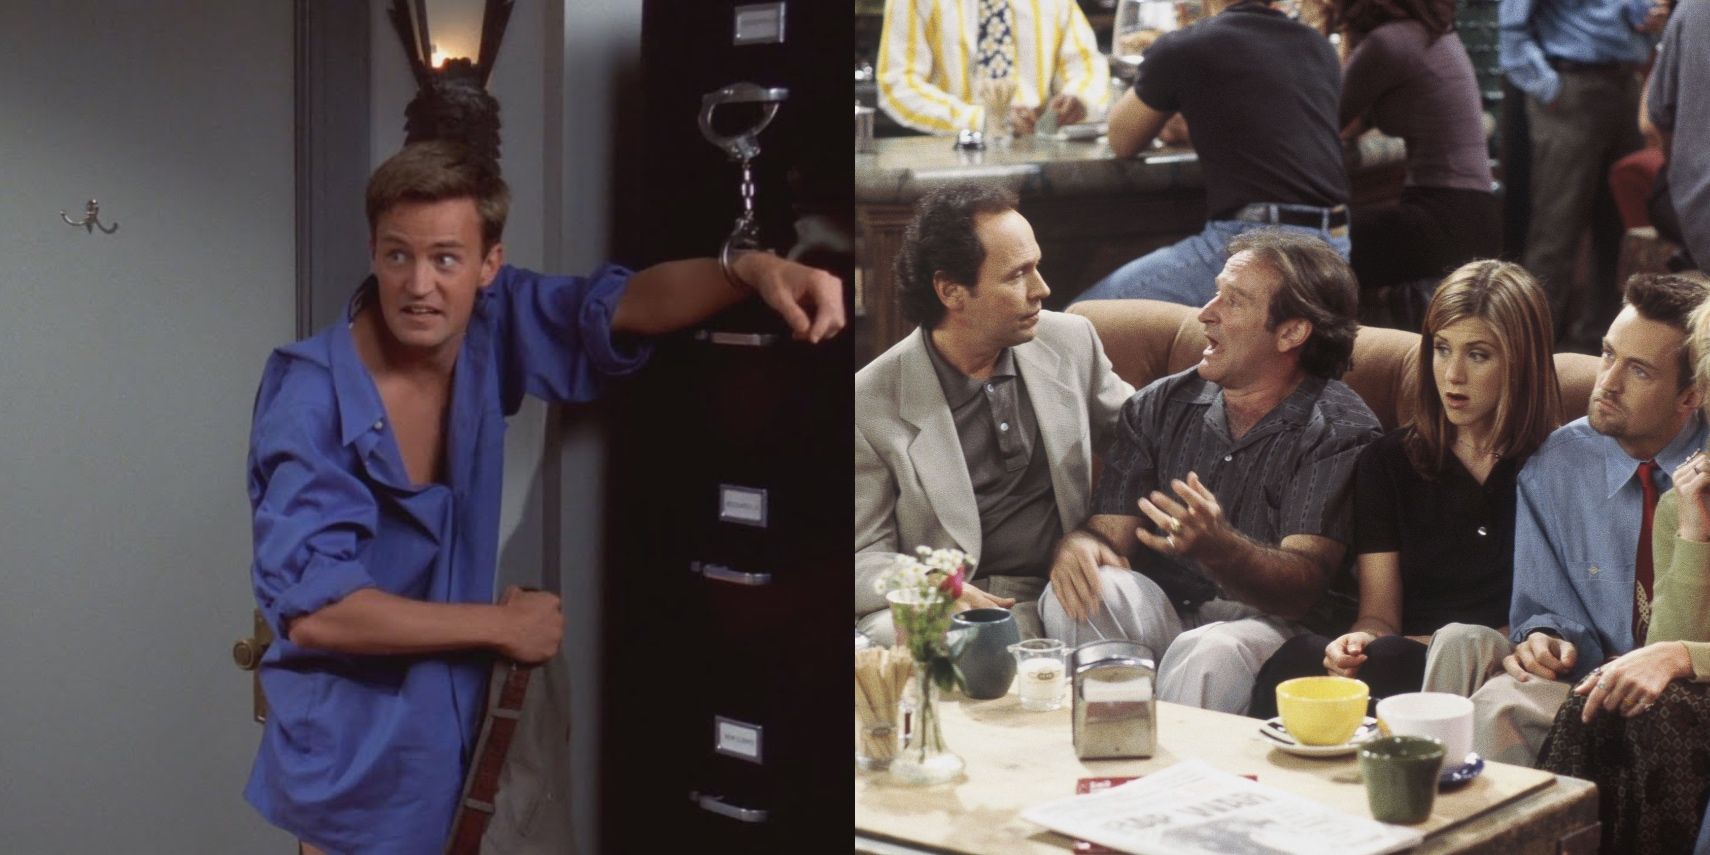 Chandler handcuffed and Robin Williams special guest in Friends